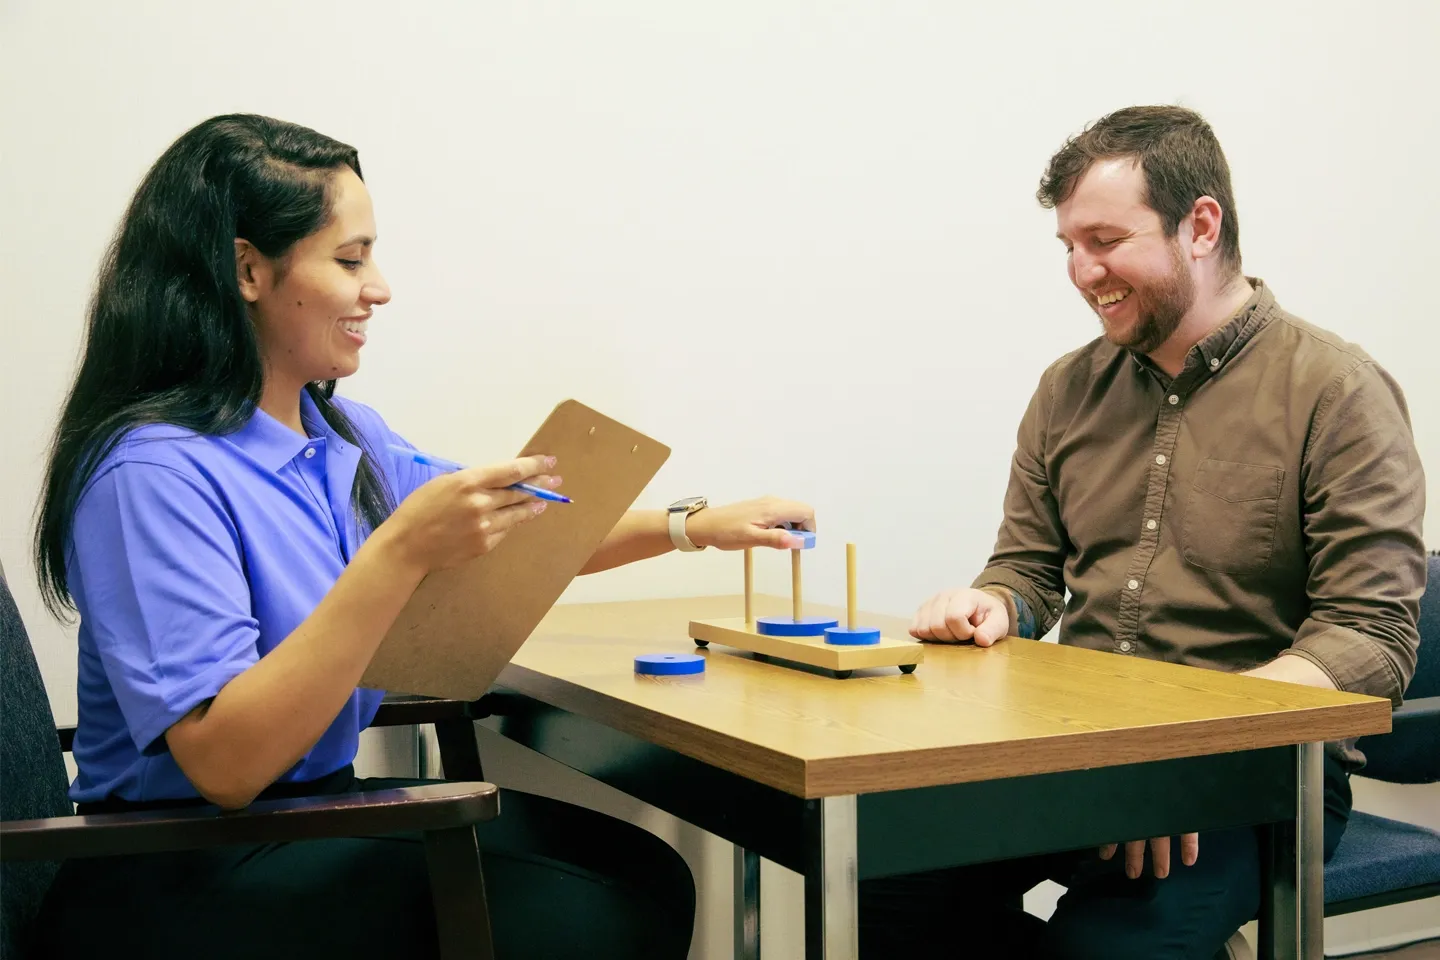 A female research assistant sits across from a male study participant, working on cognitive memory exercises using blue circles and wooden pegs.